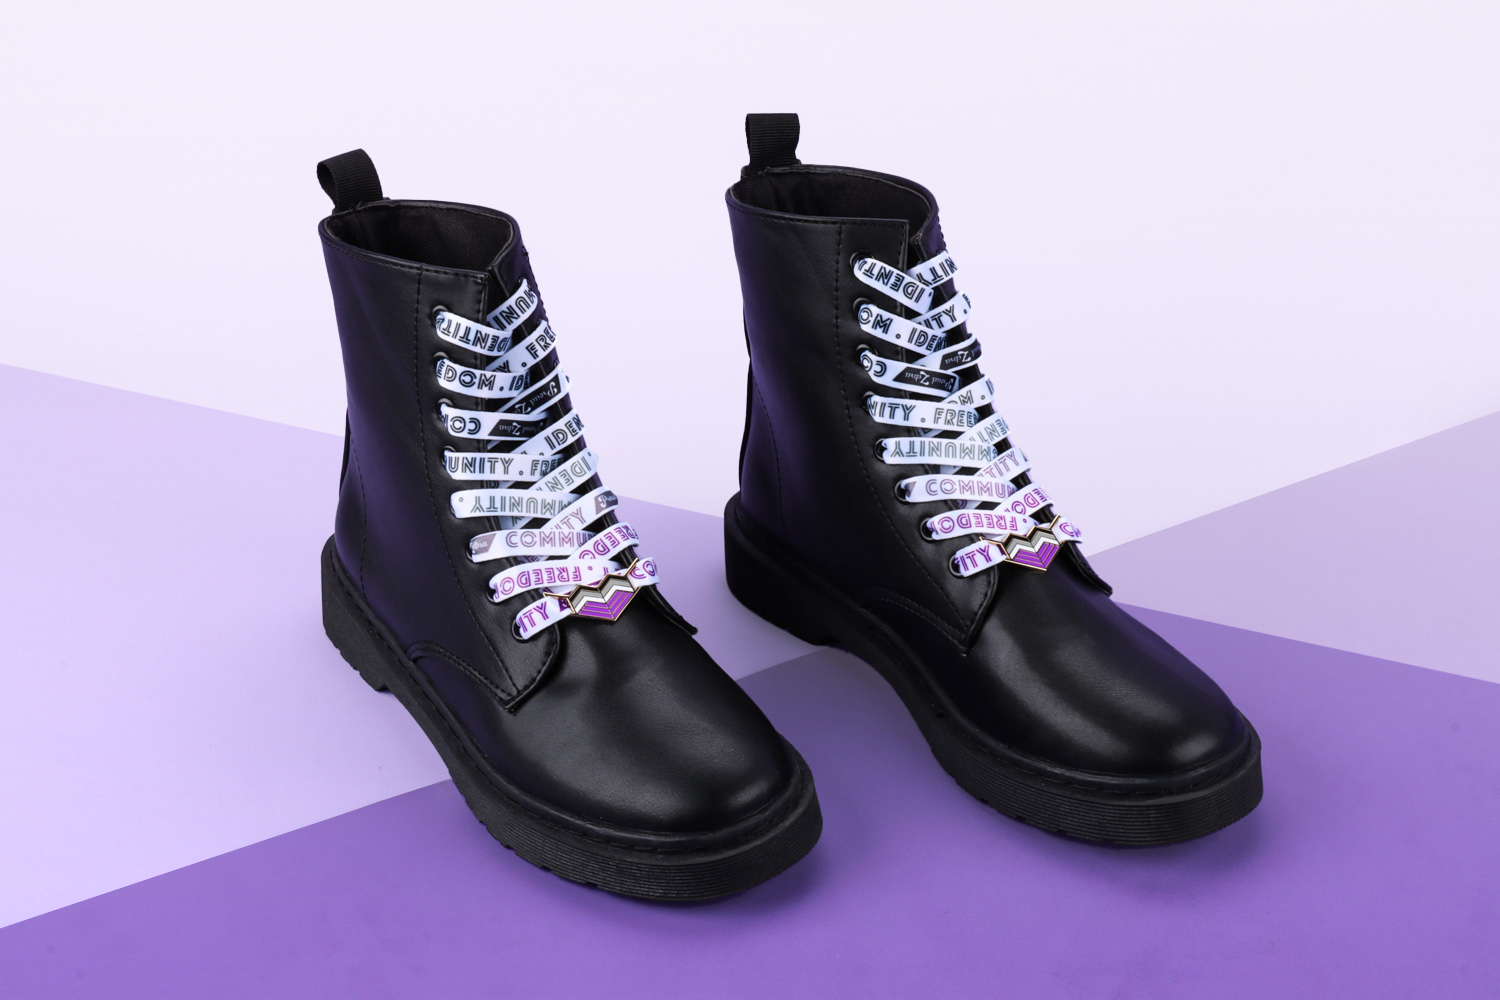 The Asexual Shoelace Locks